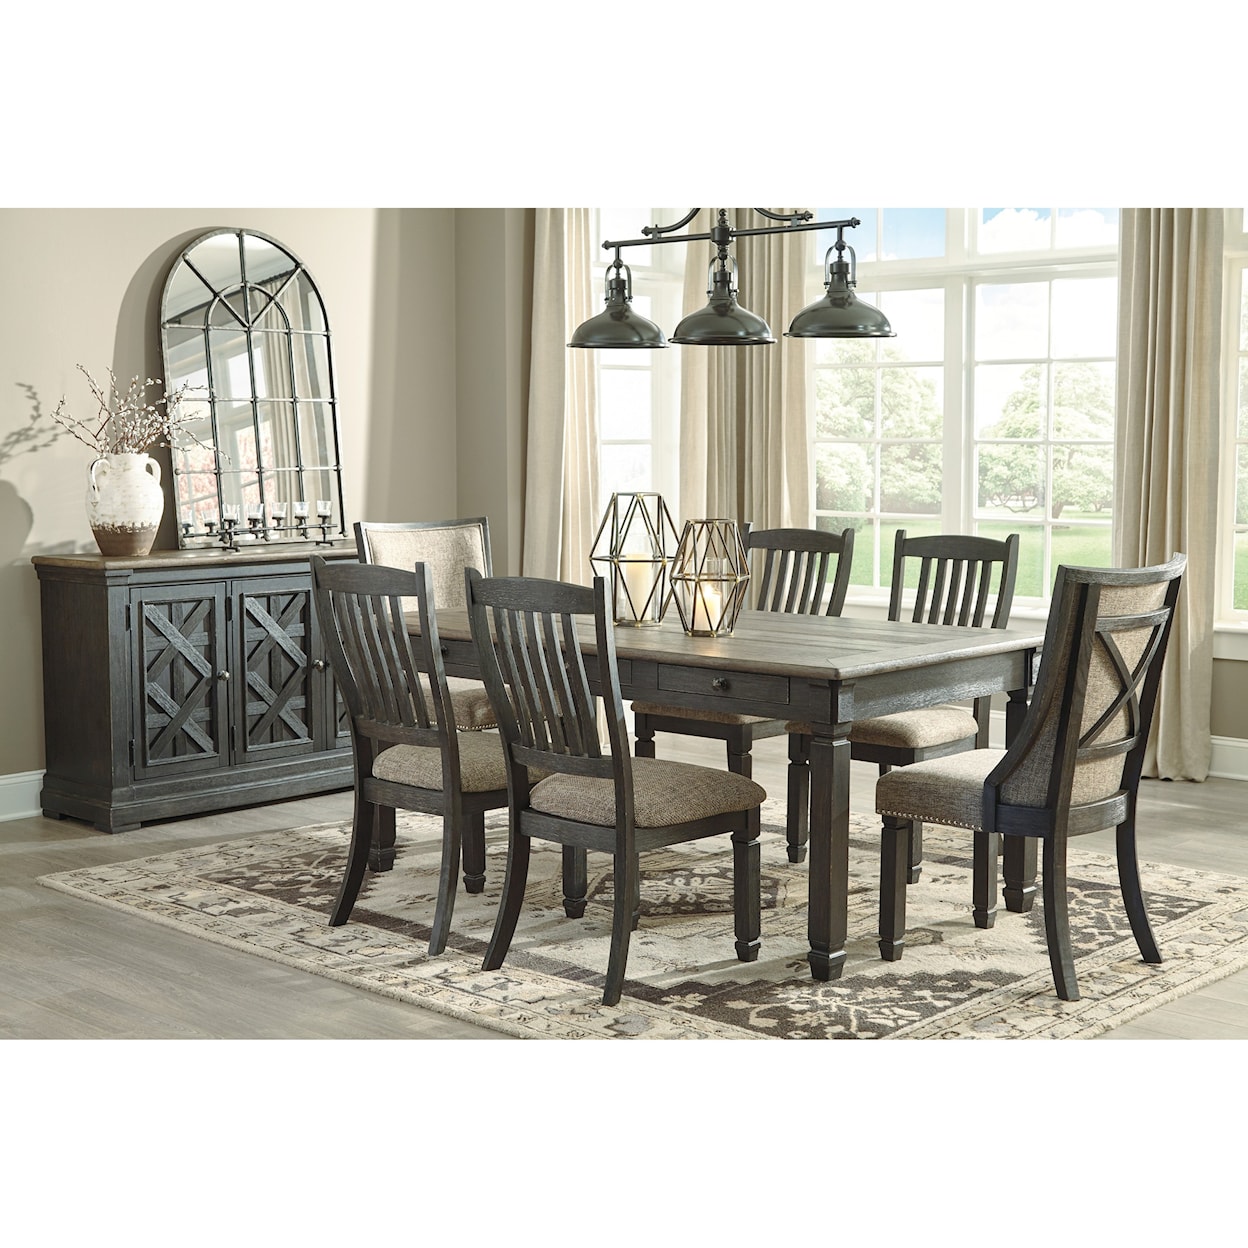 Signature Tyler Creek Formal Dining Room Group